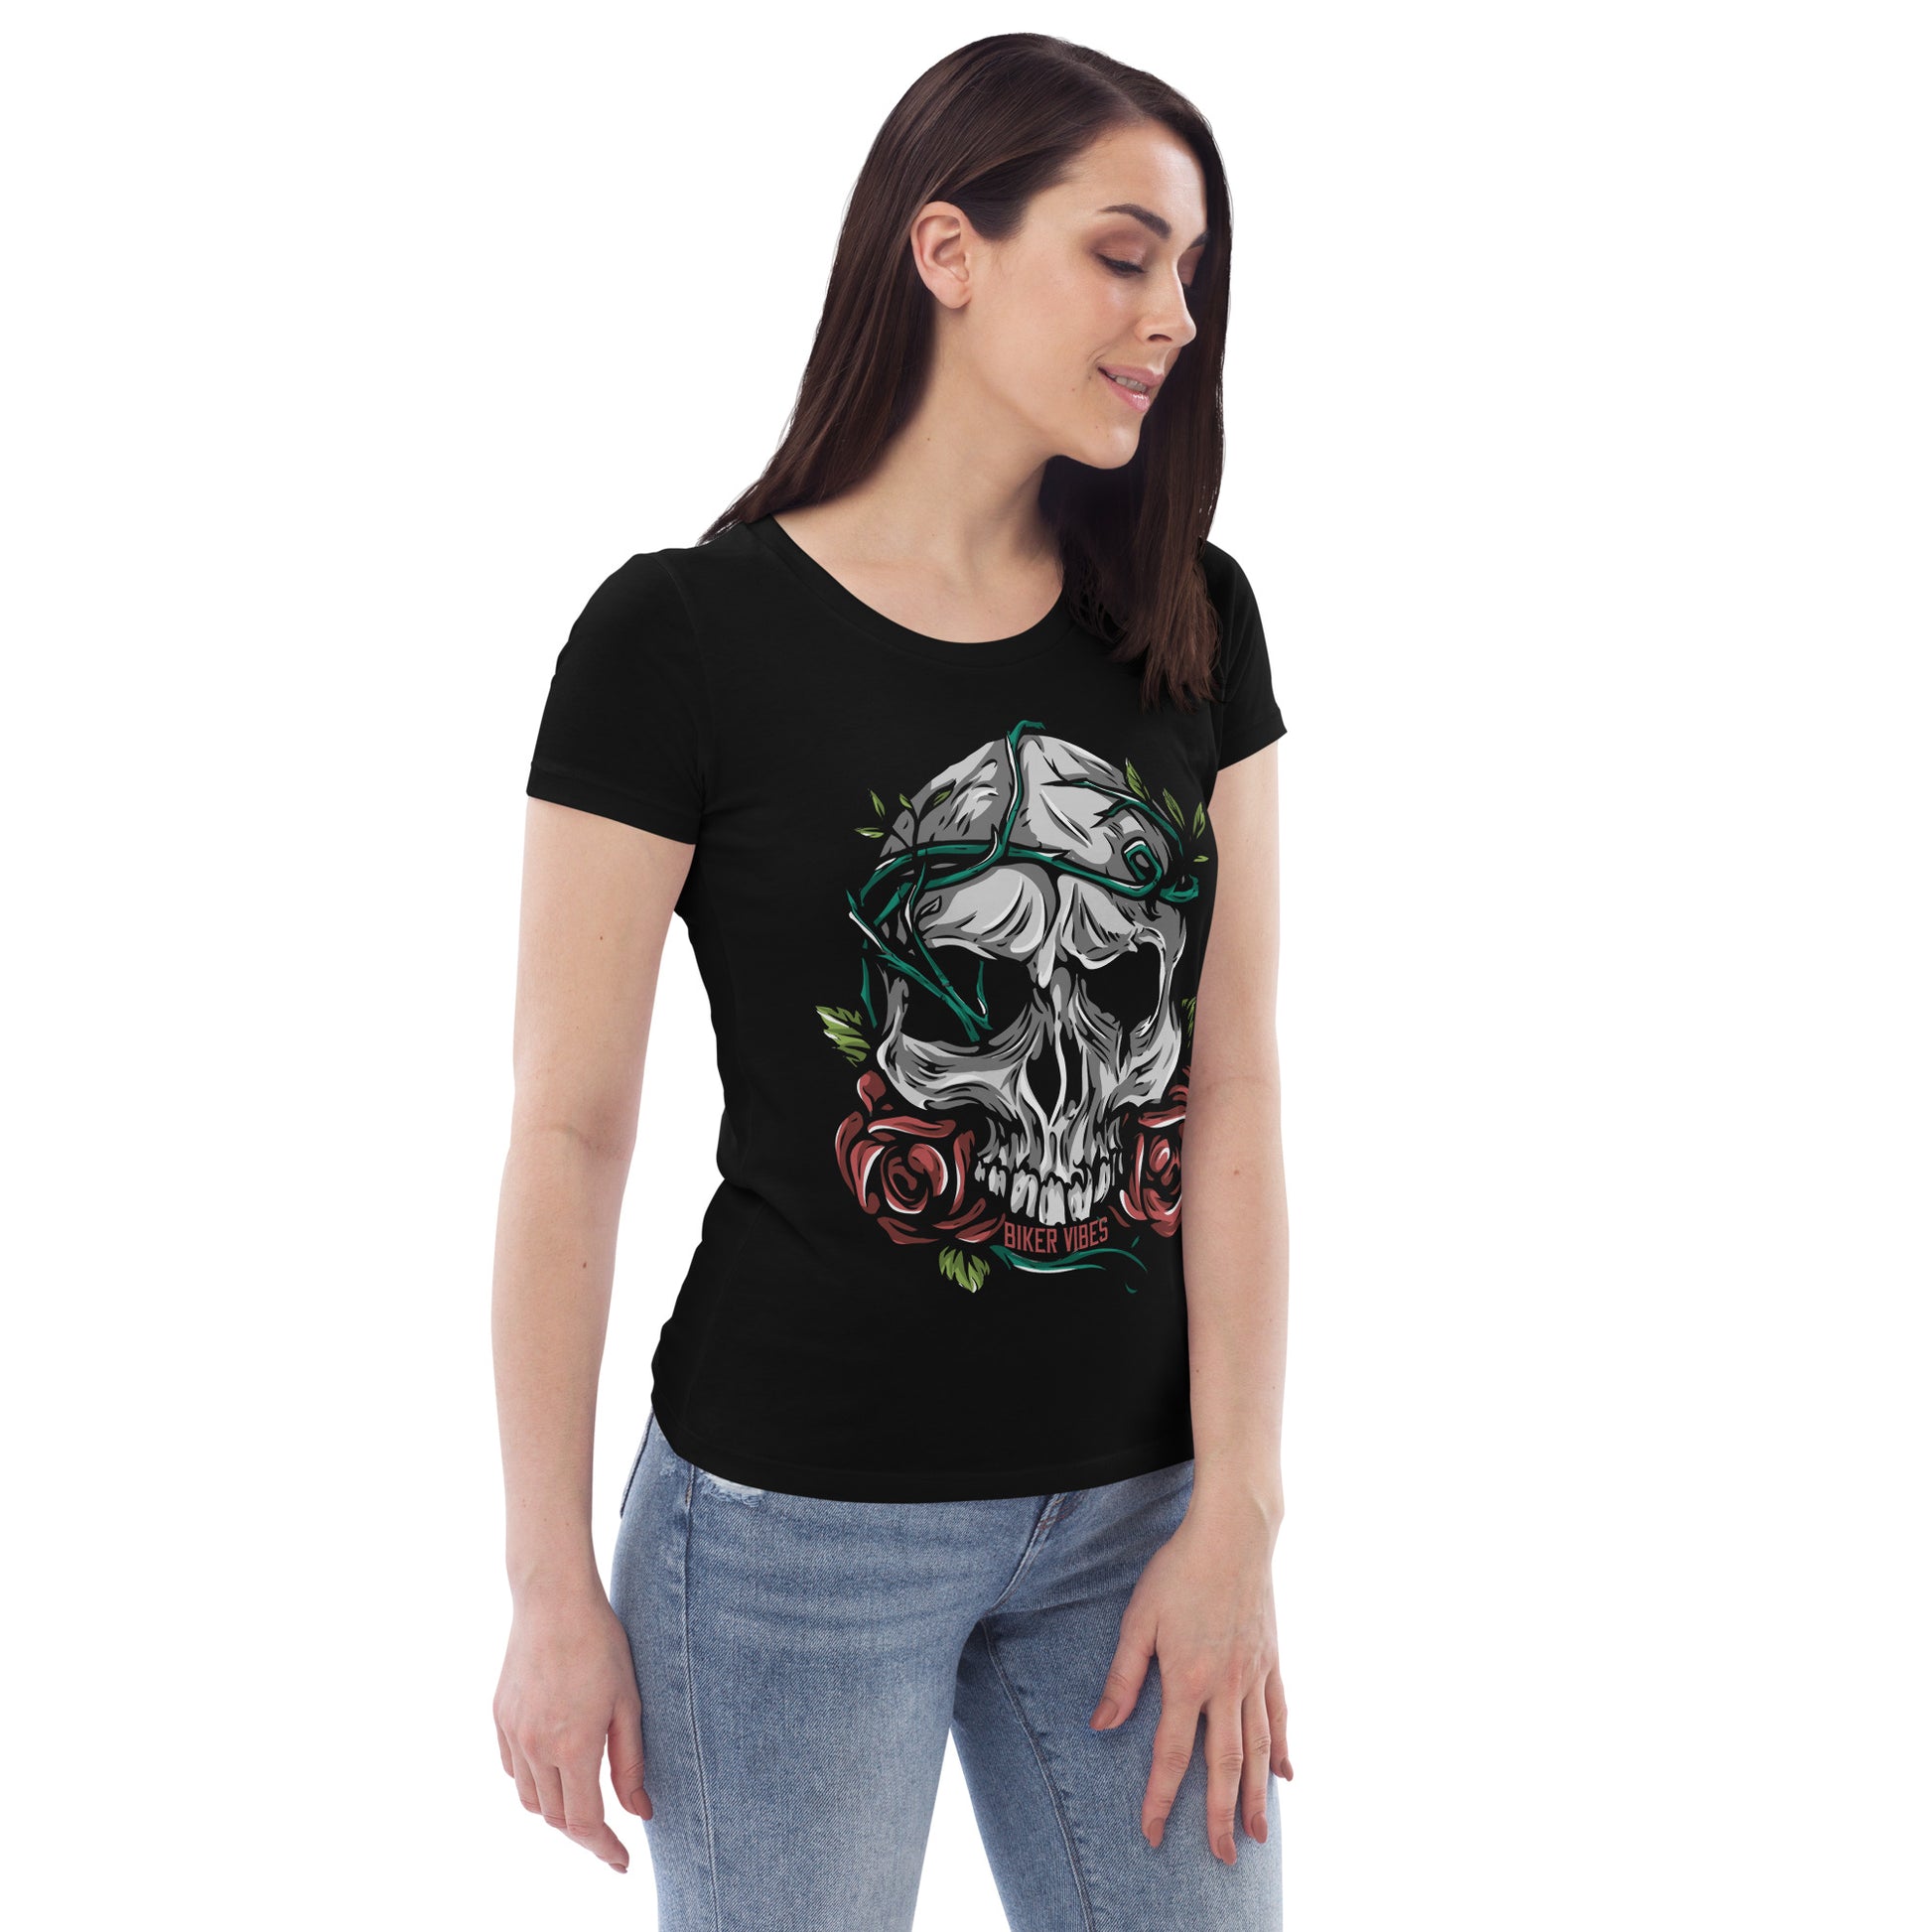 TIME OF VIBES - Women's fitted eco tee FLOWERSKULL (Black) - €32.00